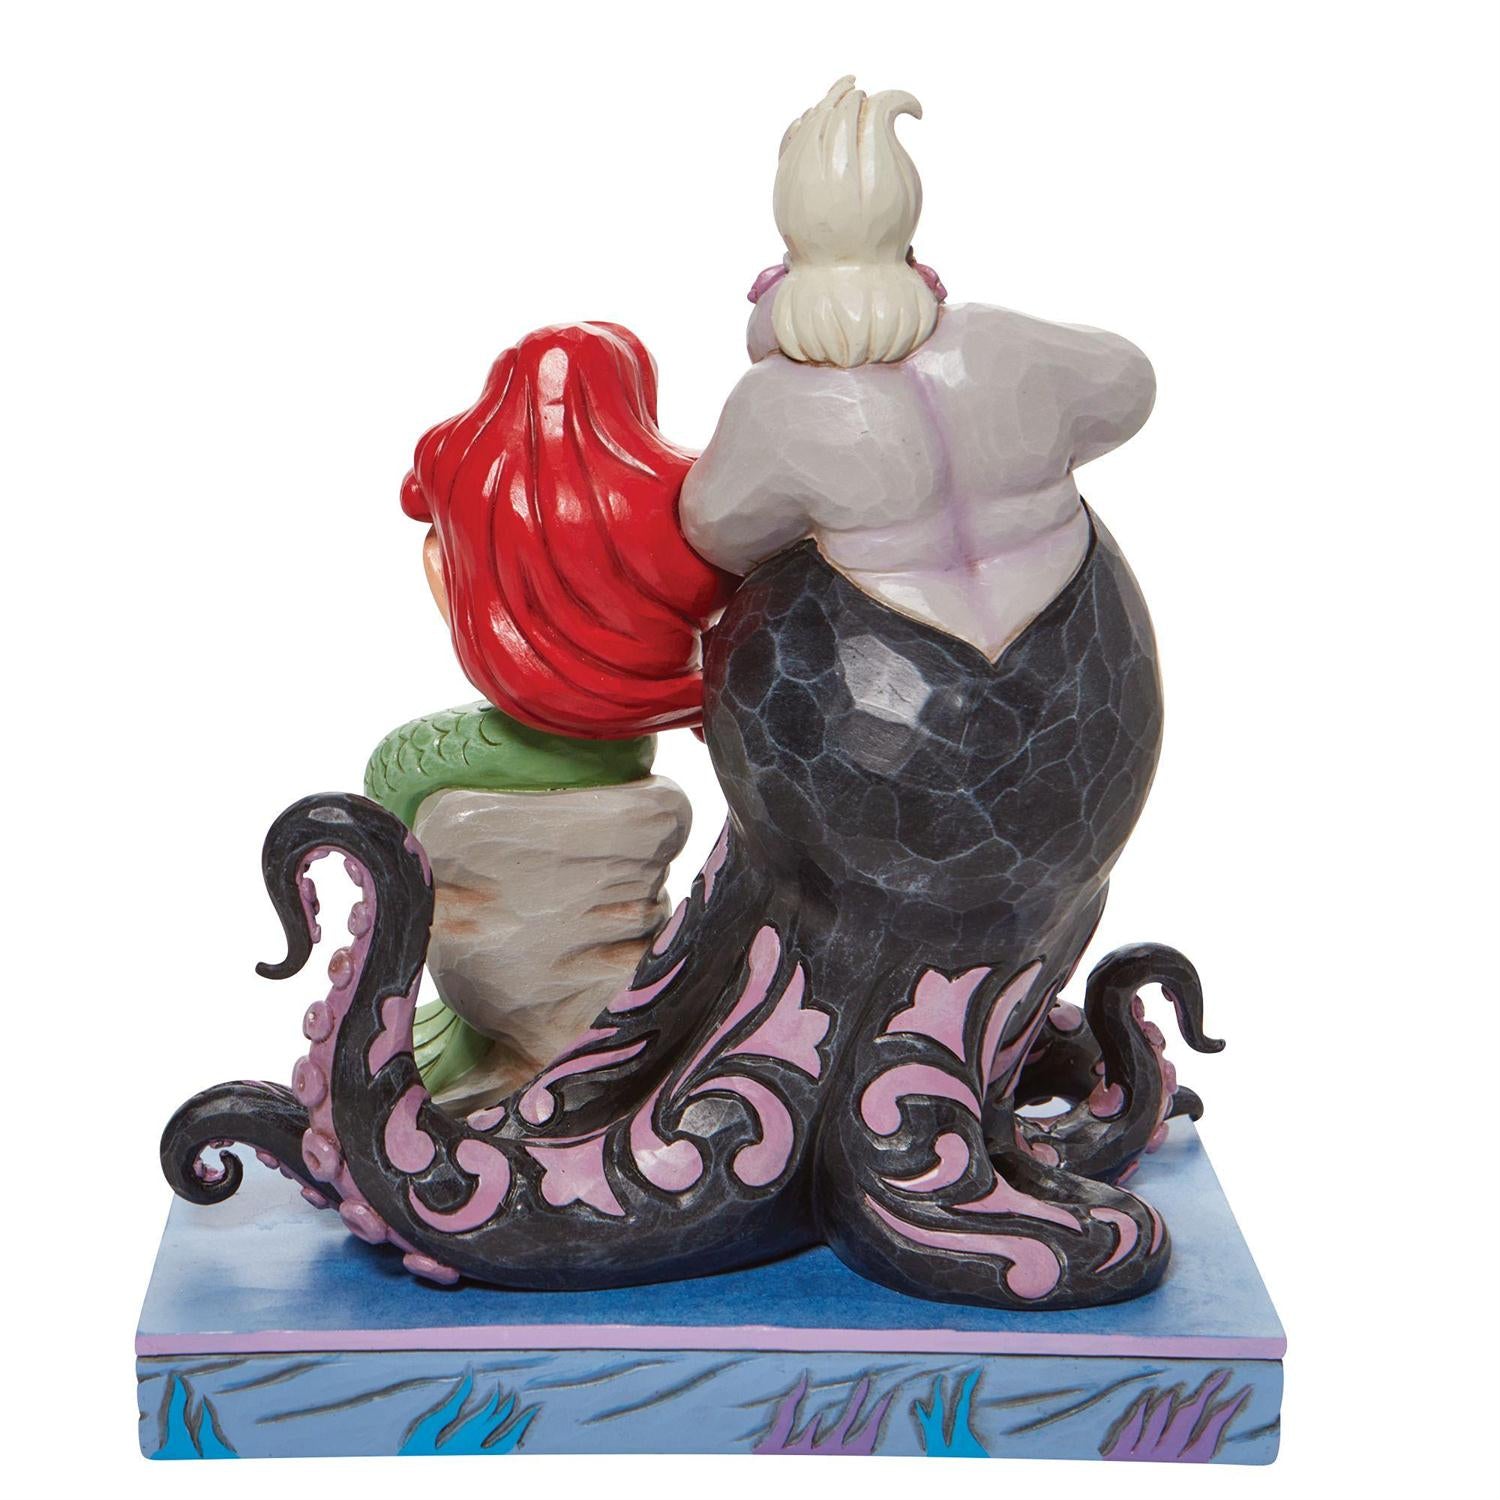 Ariel and Ursula - back view